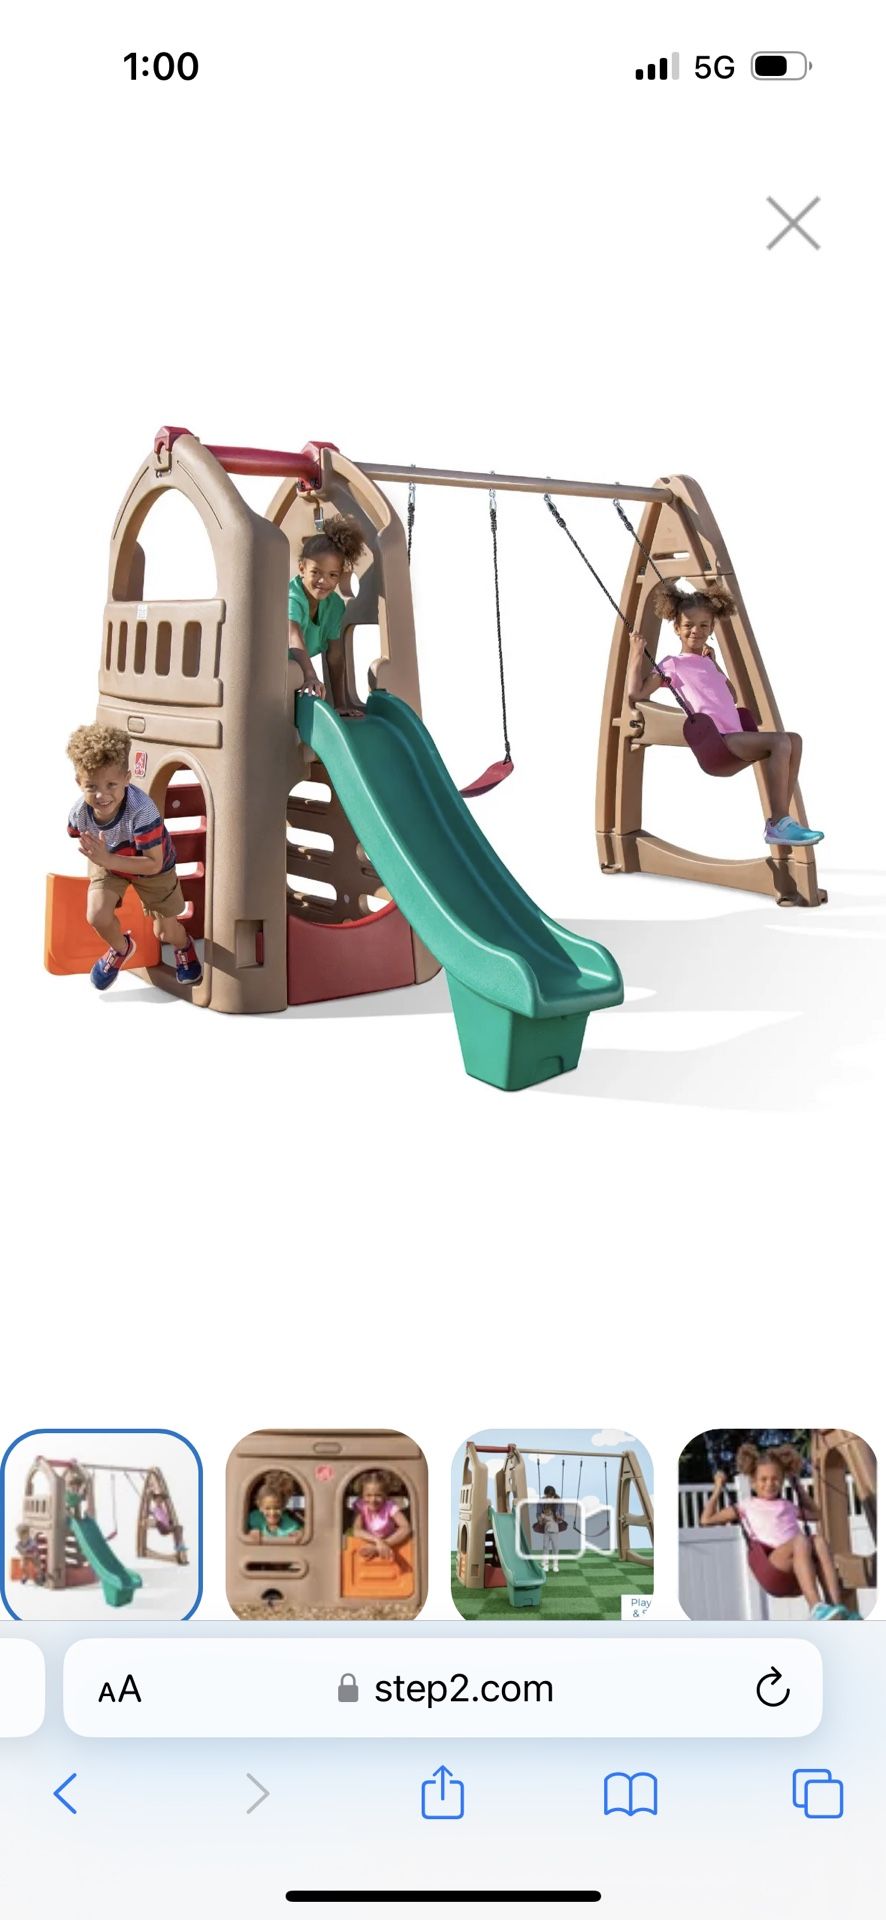 Step2 Playset,  Playhouse, climber, Slide And Swing Playscape, Swing Set